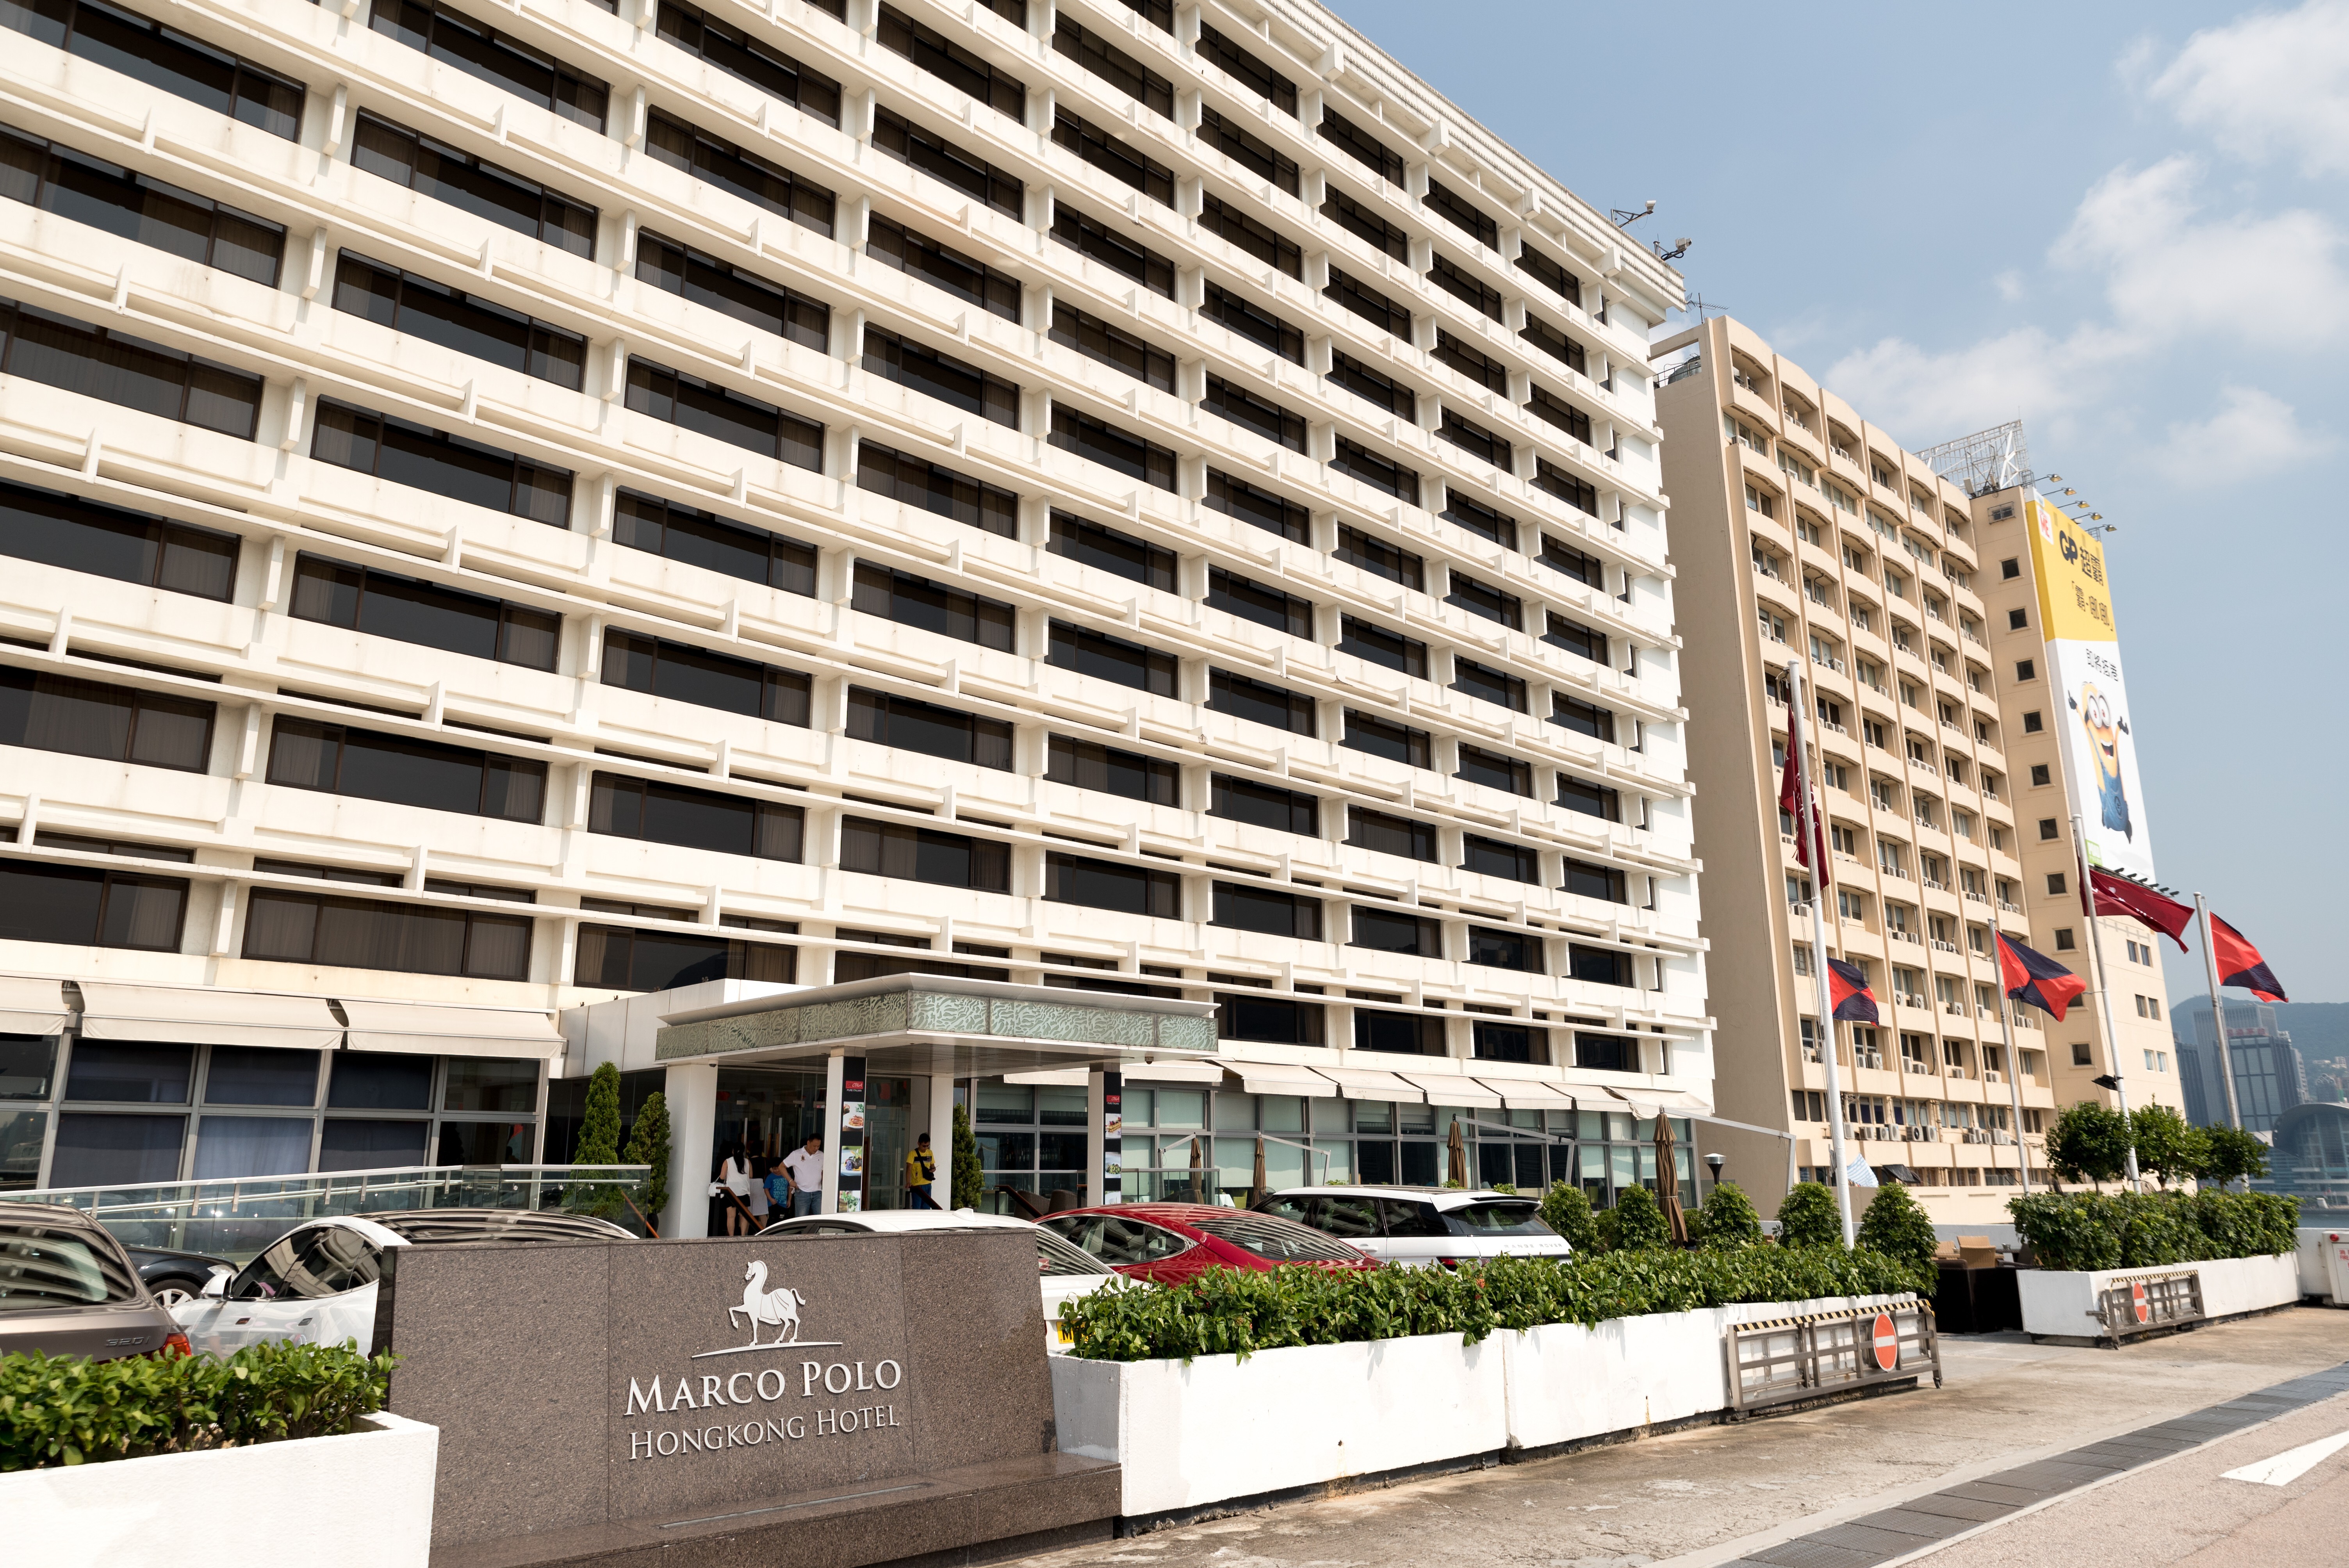 The Marco Polo in Tsim Sha Tsui, one of the group’s flagship assets. Photo: Shutterstock